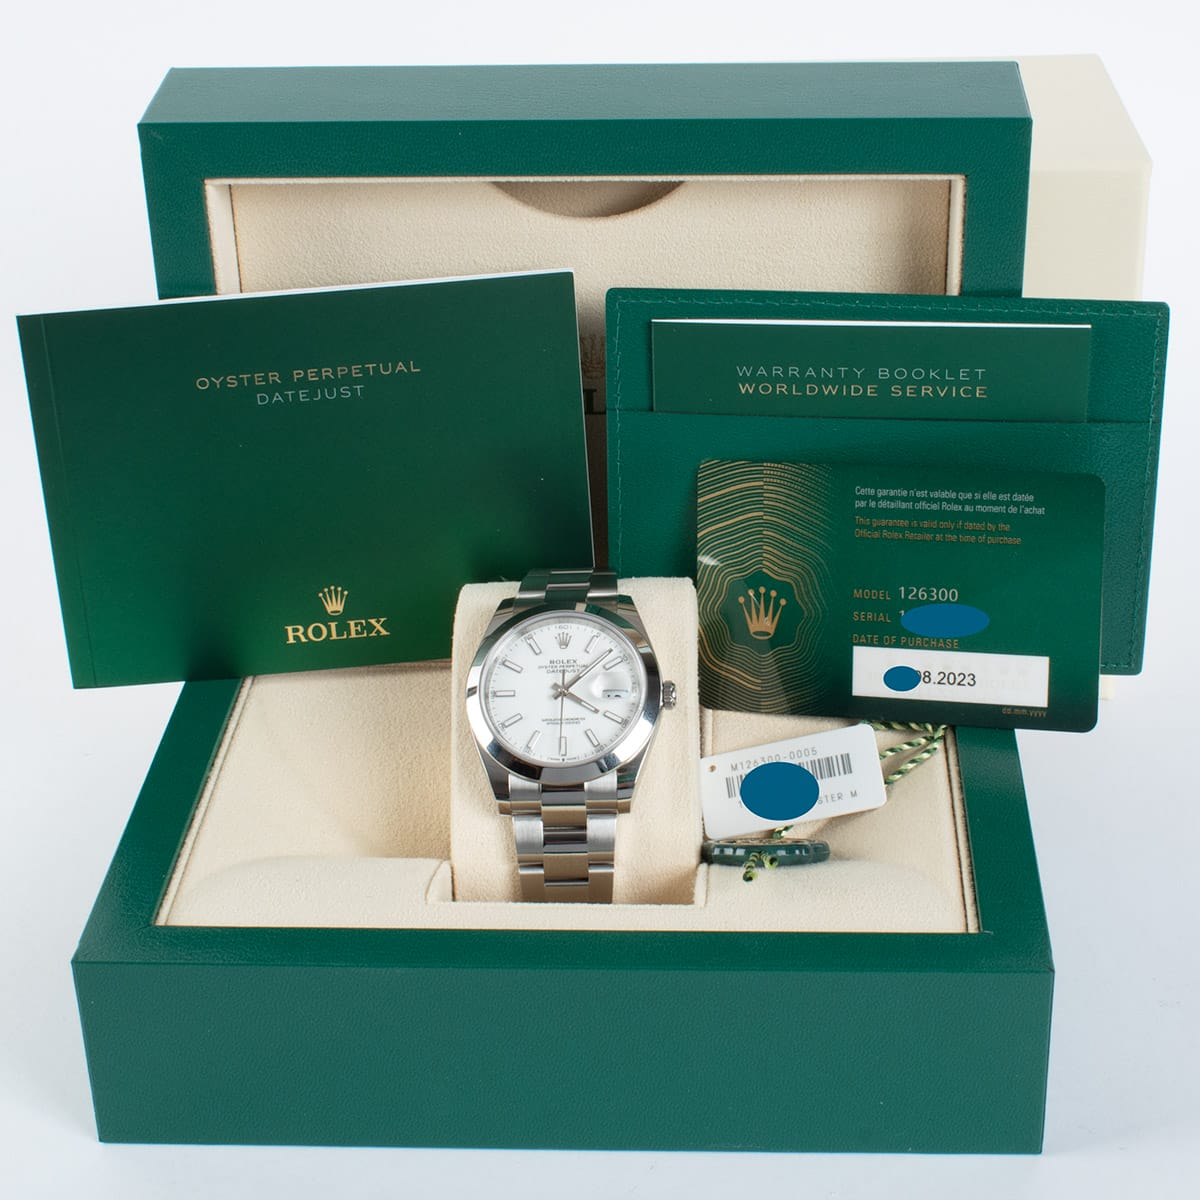 View in Box of Datejust 41